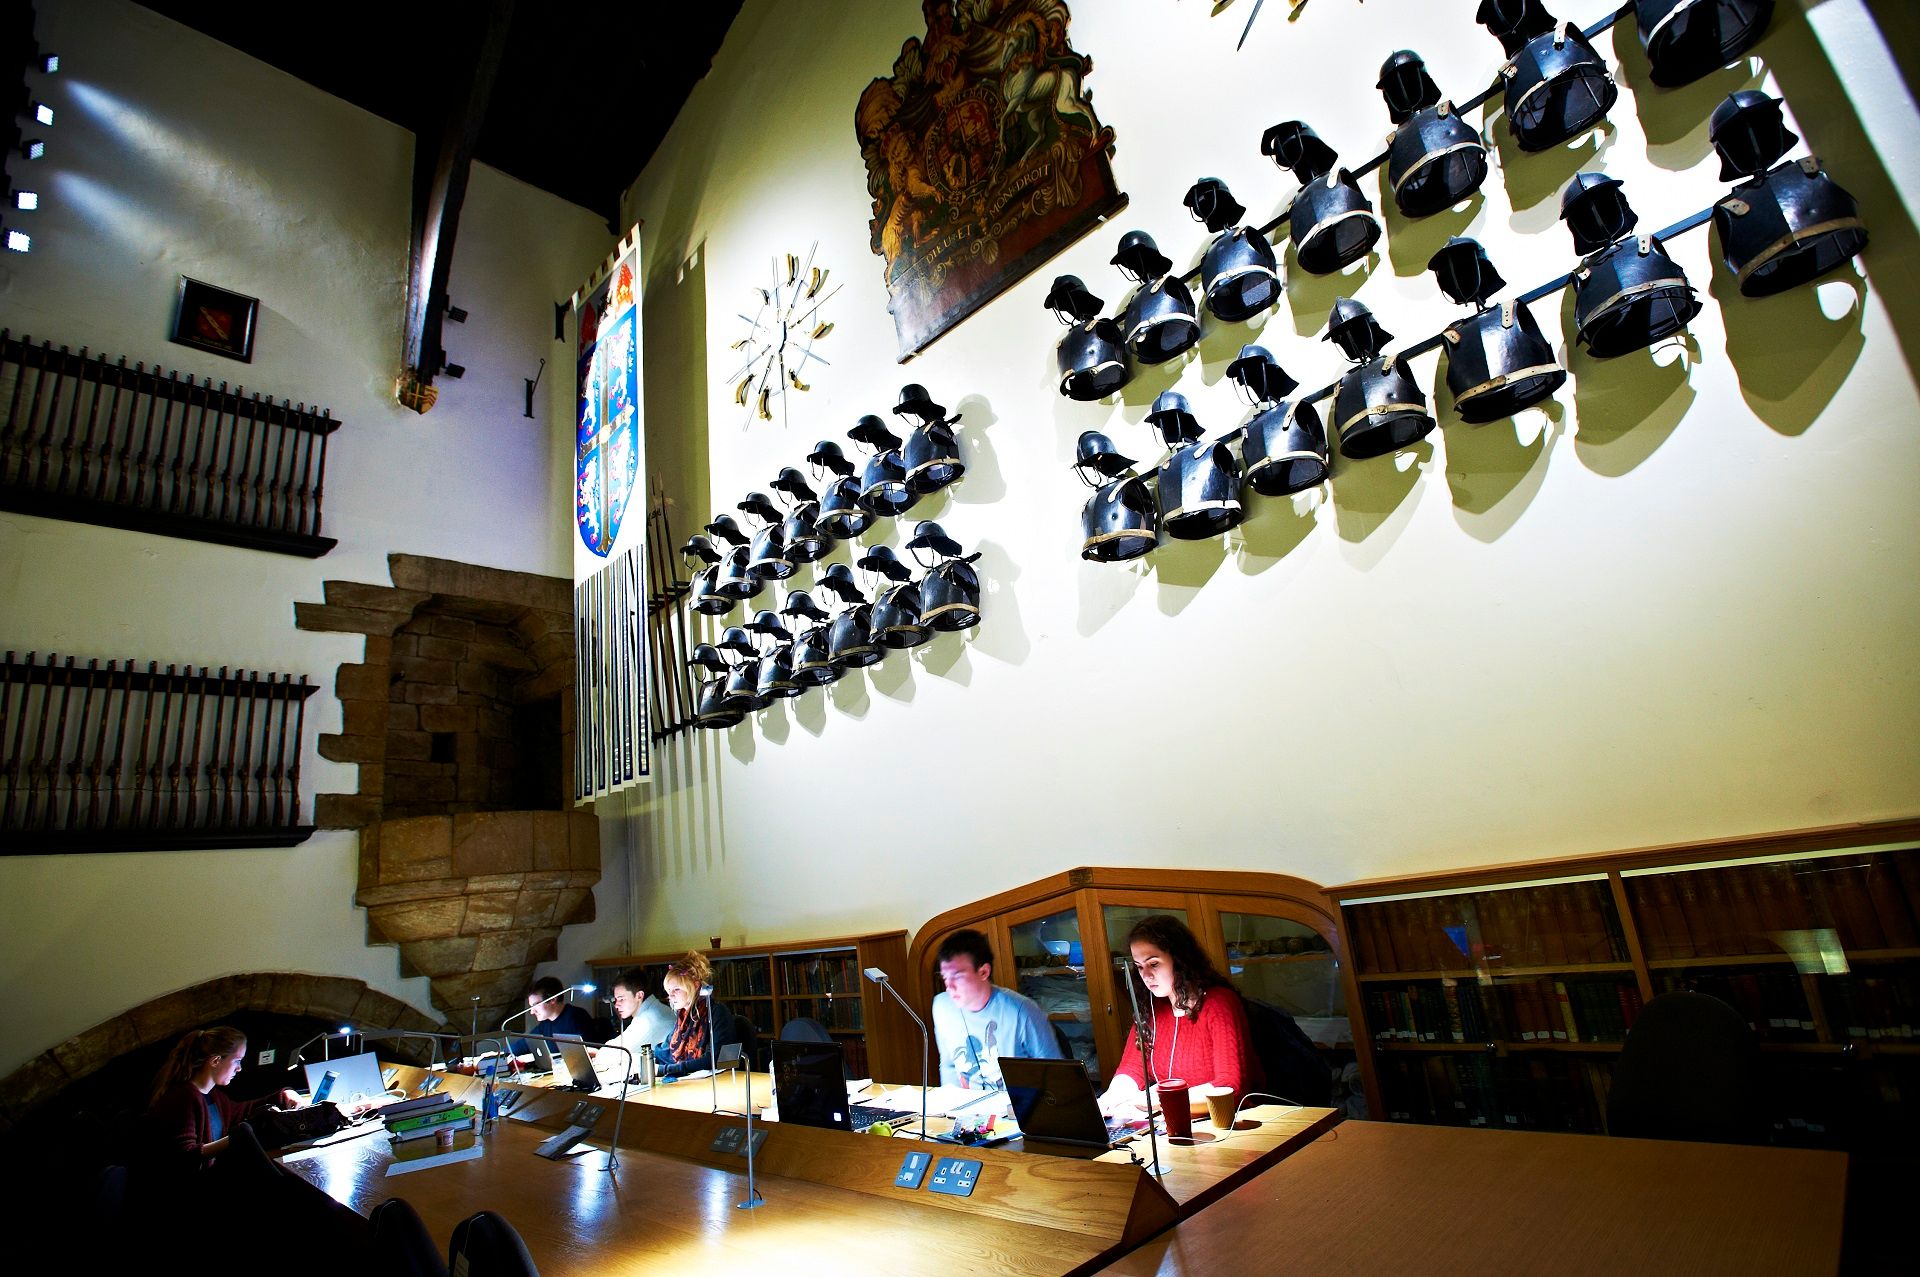 A coloured photograph taken in the Minstrel’s Gallery, looking towards the south wall of the Great Hall. At the top of the image are the armour. Below students are studying.